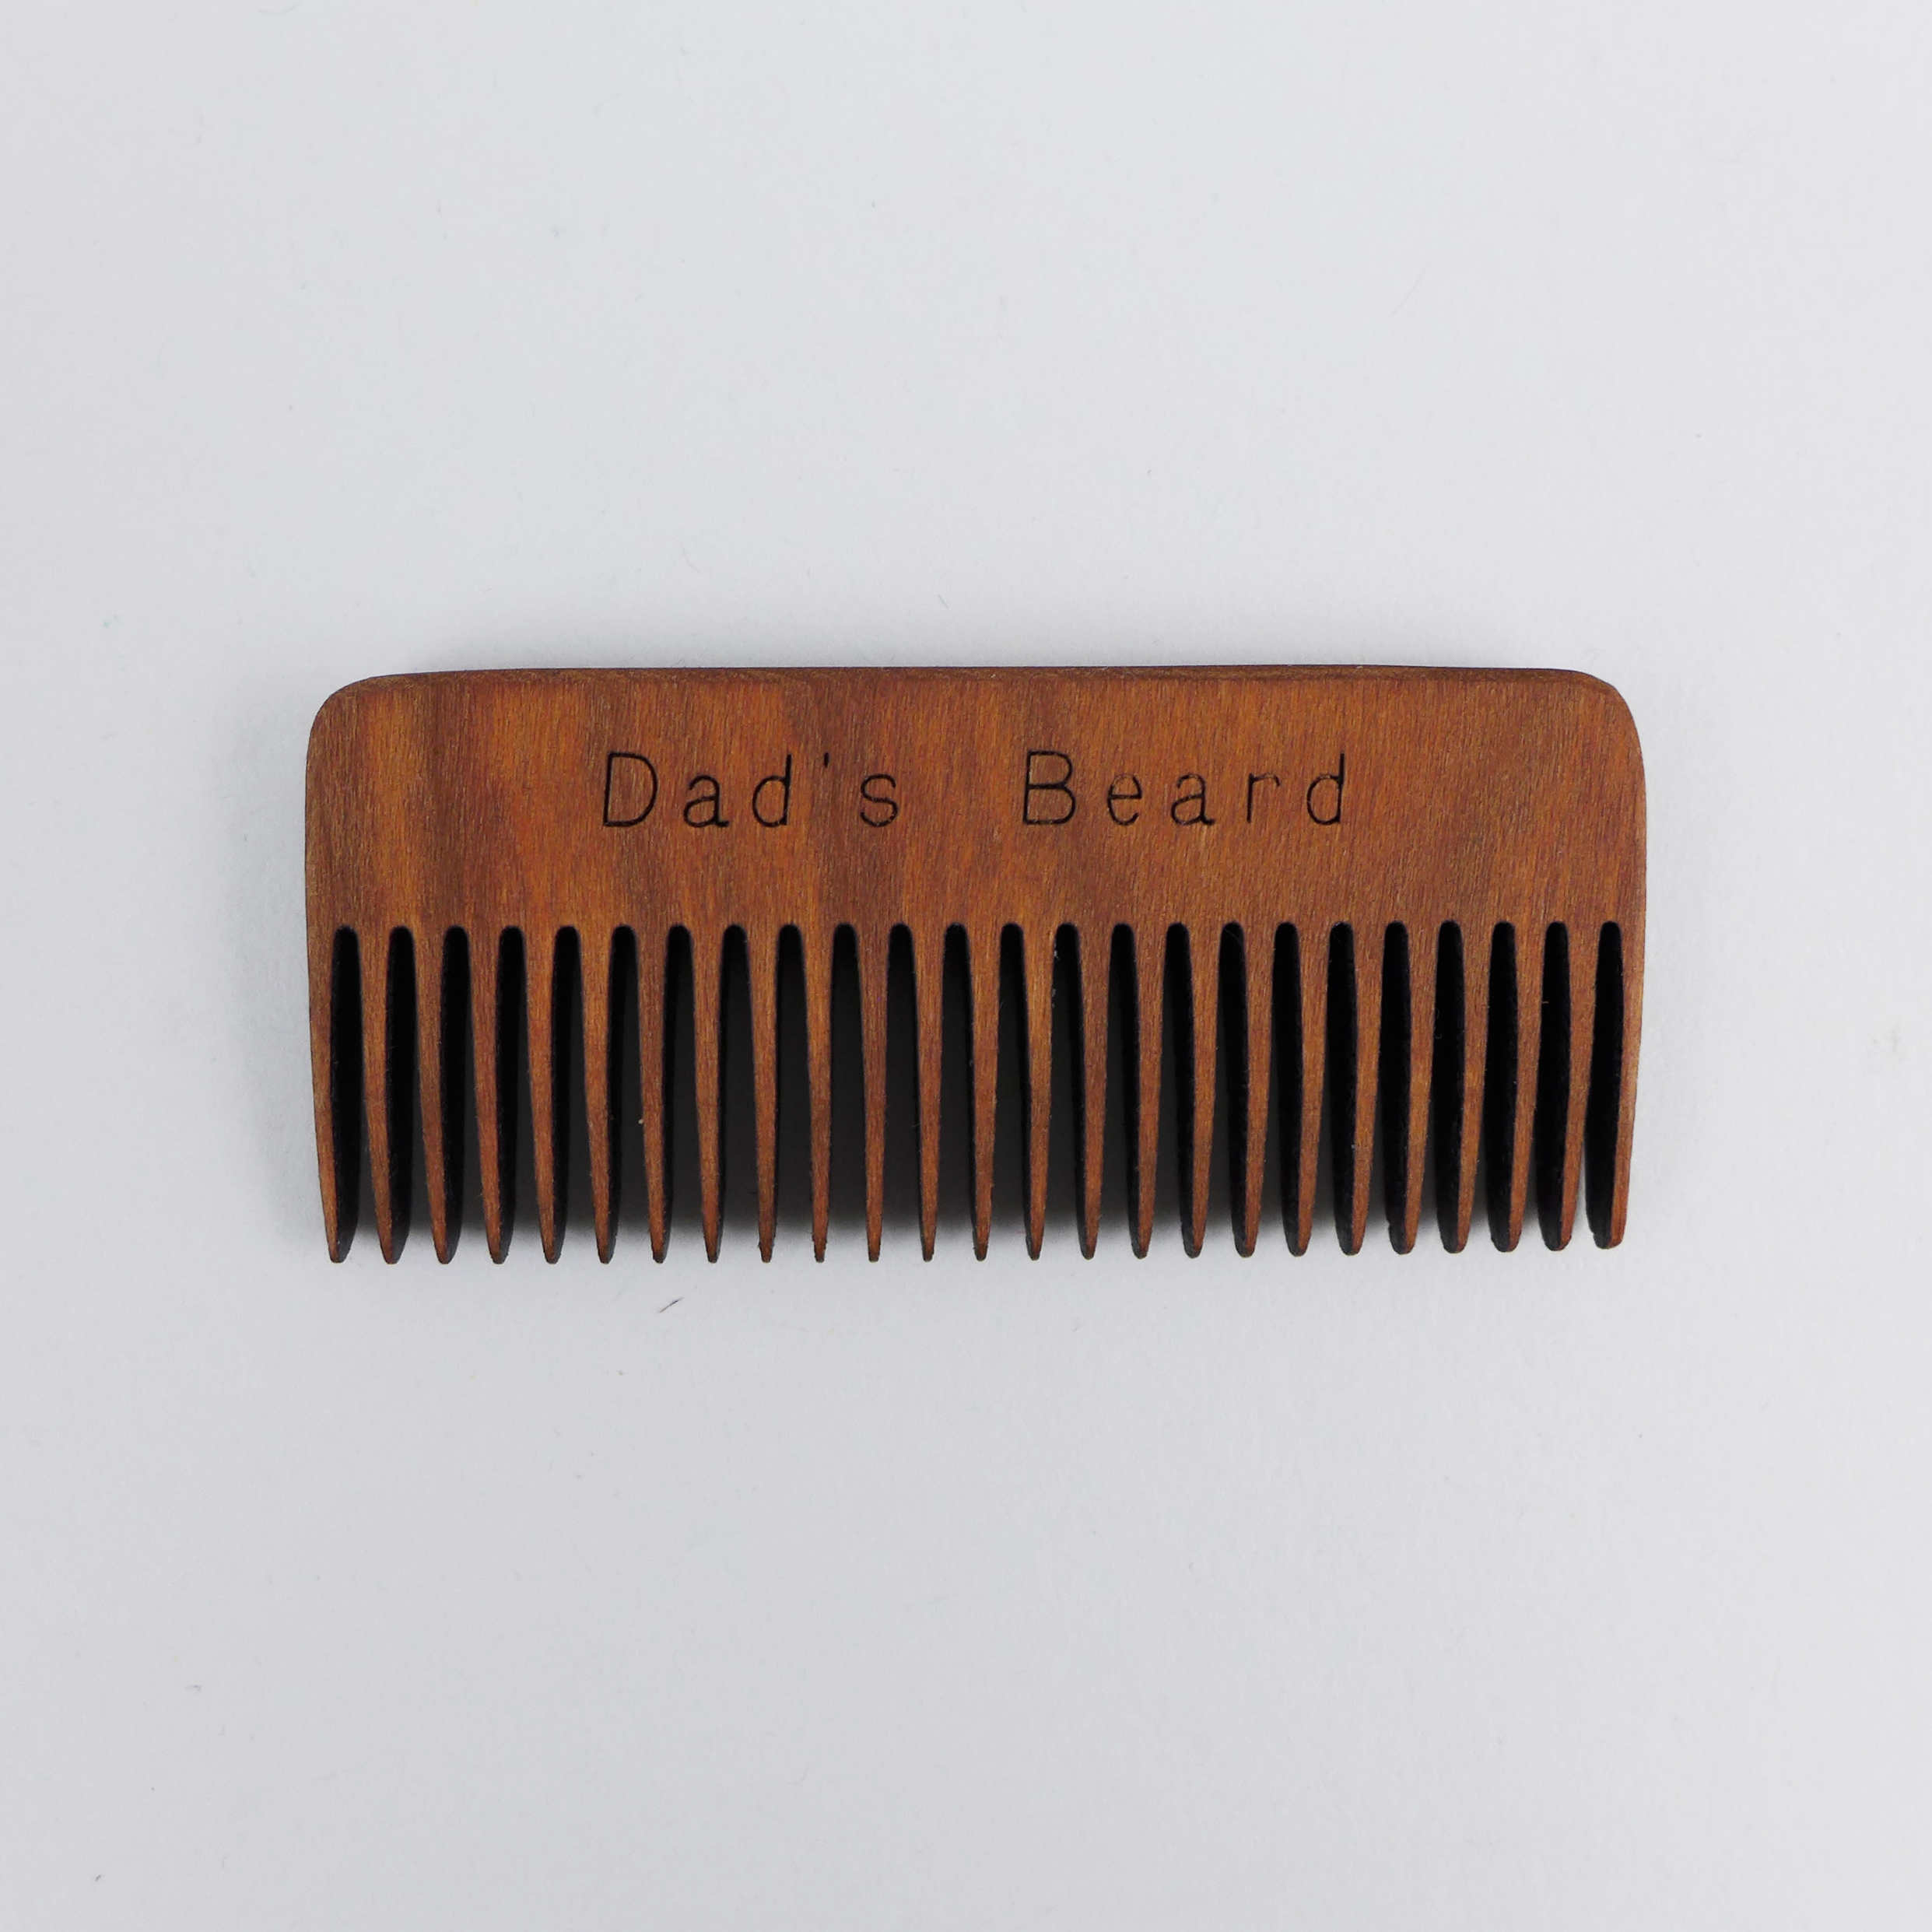 Beard comb is made out of solid cherry wood by Hannah’s Ideas in Wood at the Center for Art in Wood